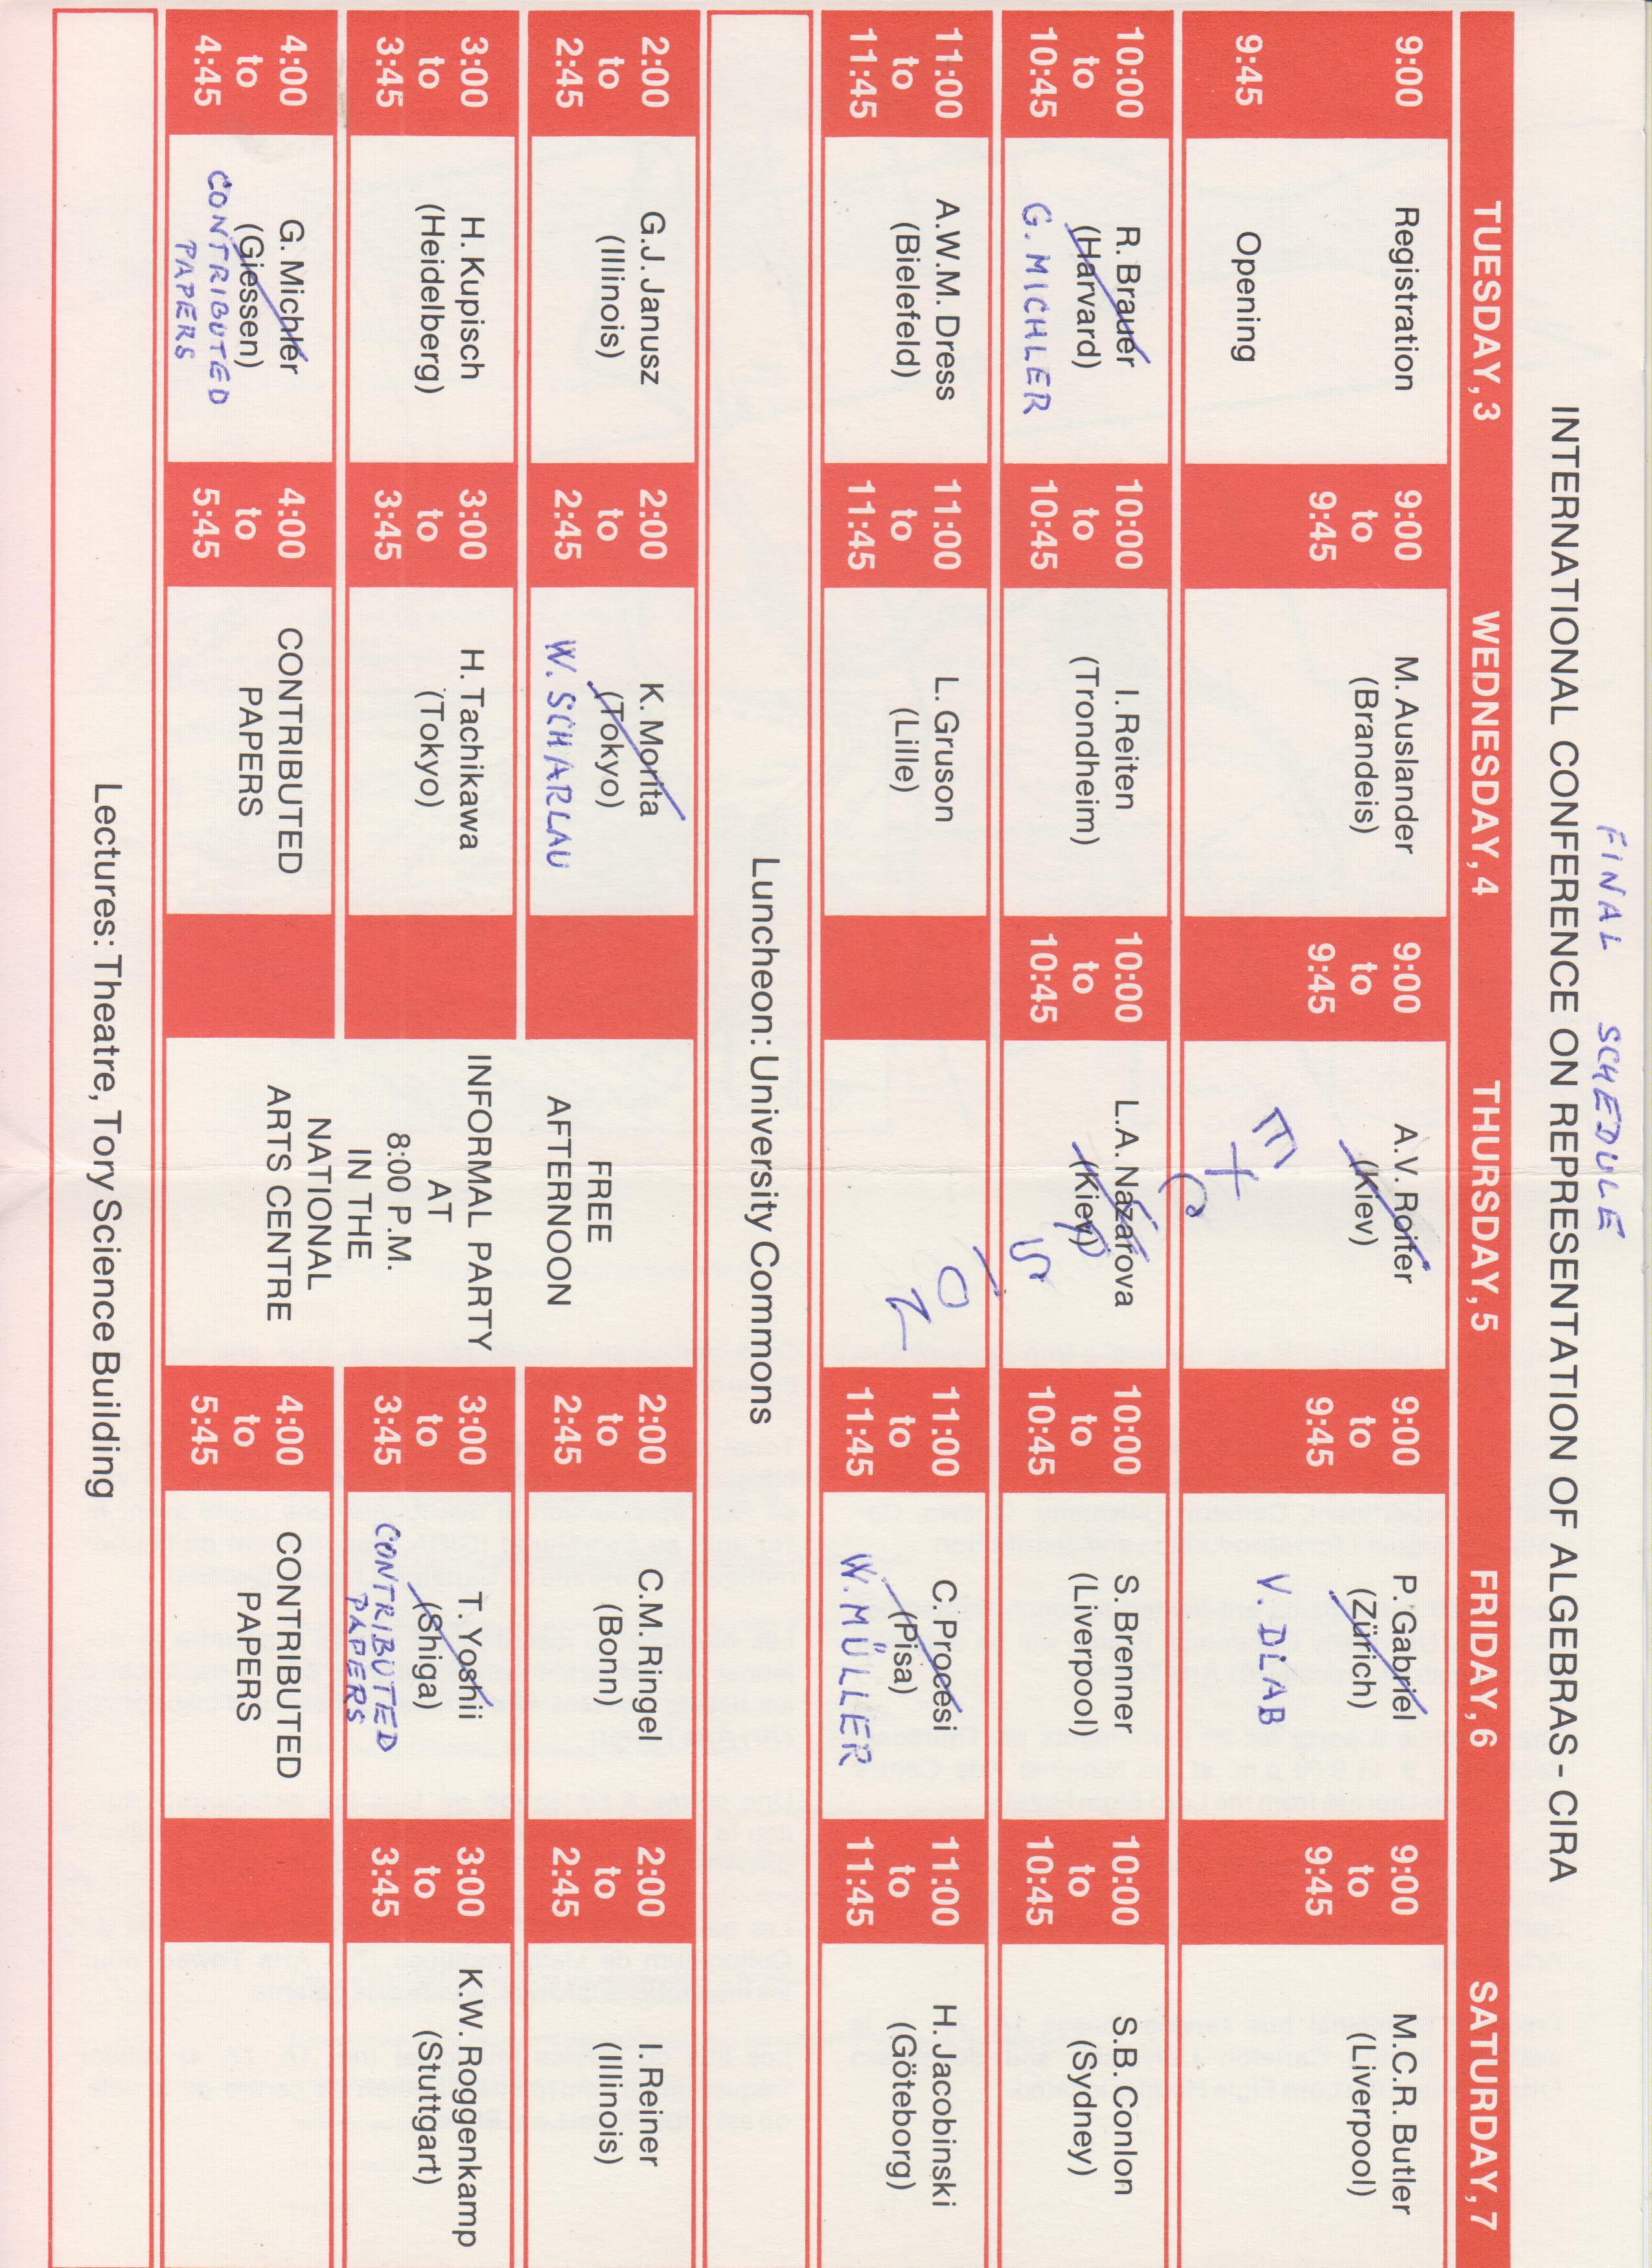 Picture of the ICRA 1974 schedule